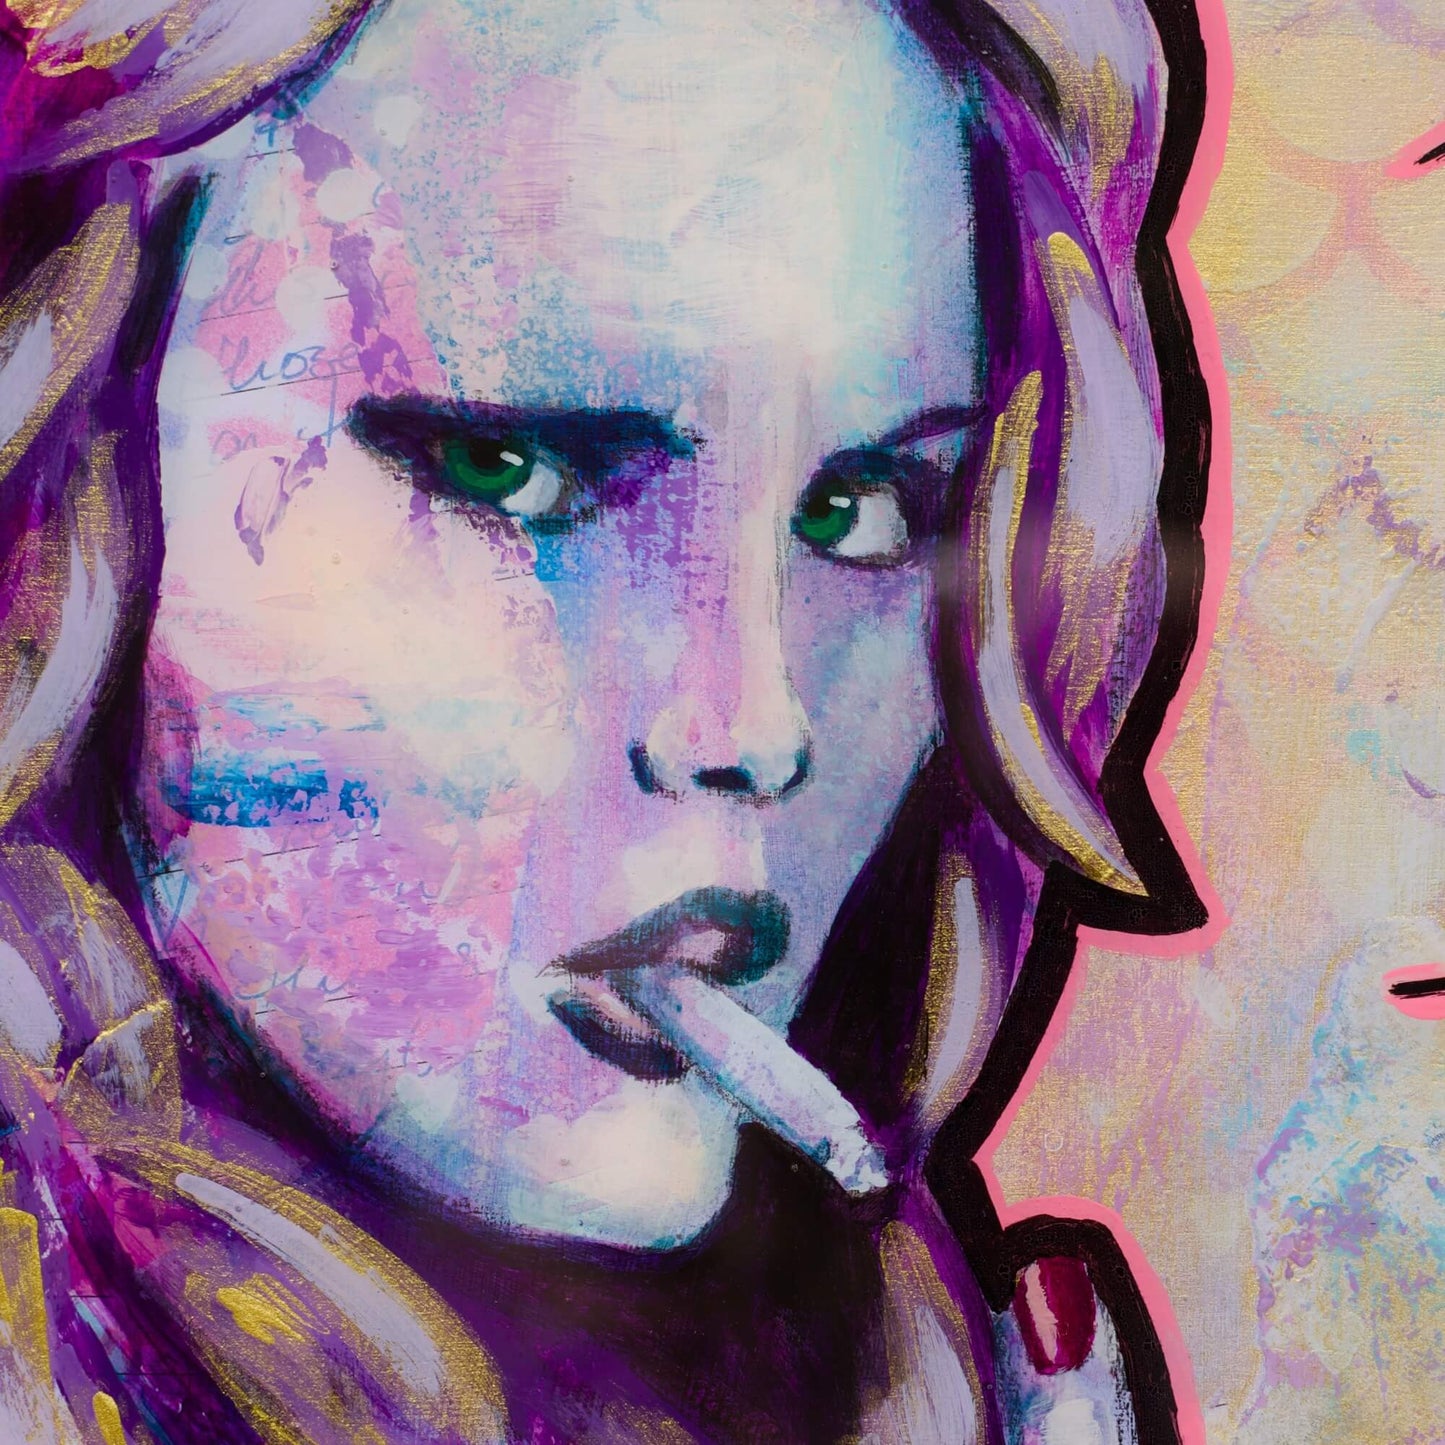 Artwork for Sale – Mini Street Art Style Painting – Pink, Purple & Gold – Mixed Media Art – 'Peggy Sue' – Art Wall Painting Criss Chaney